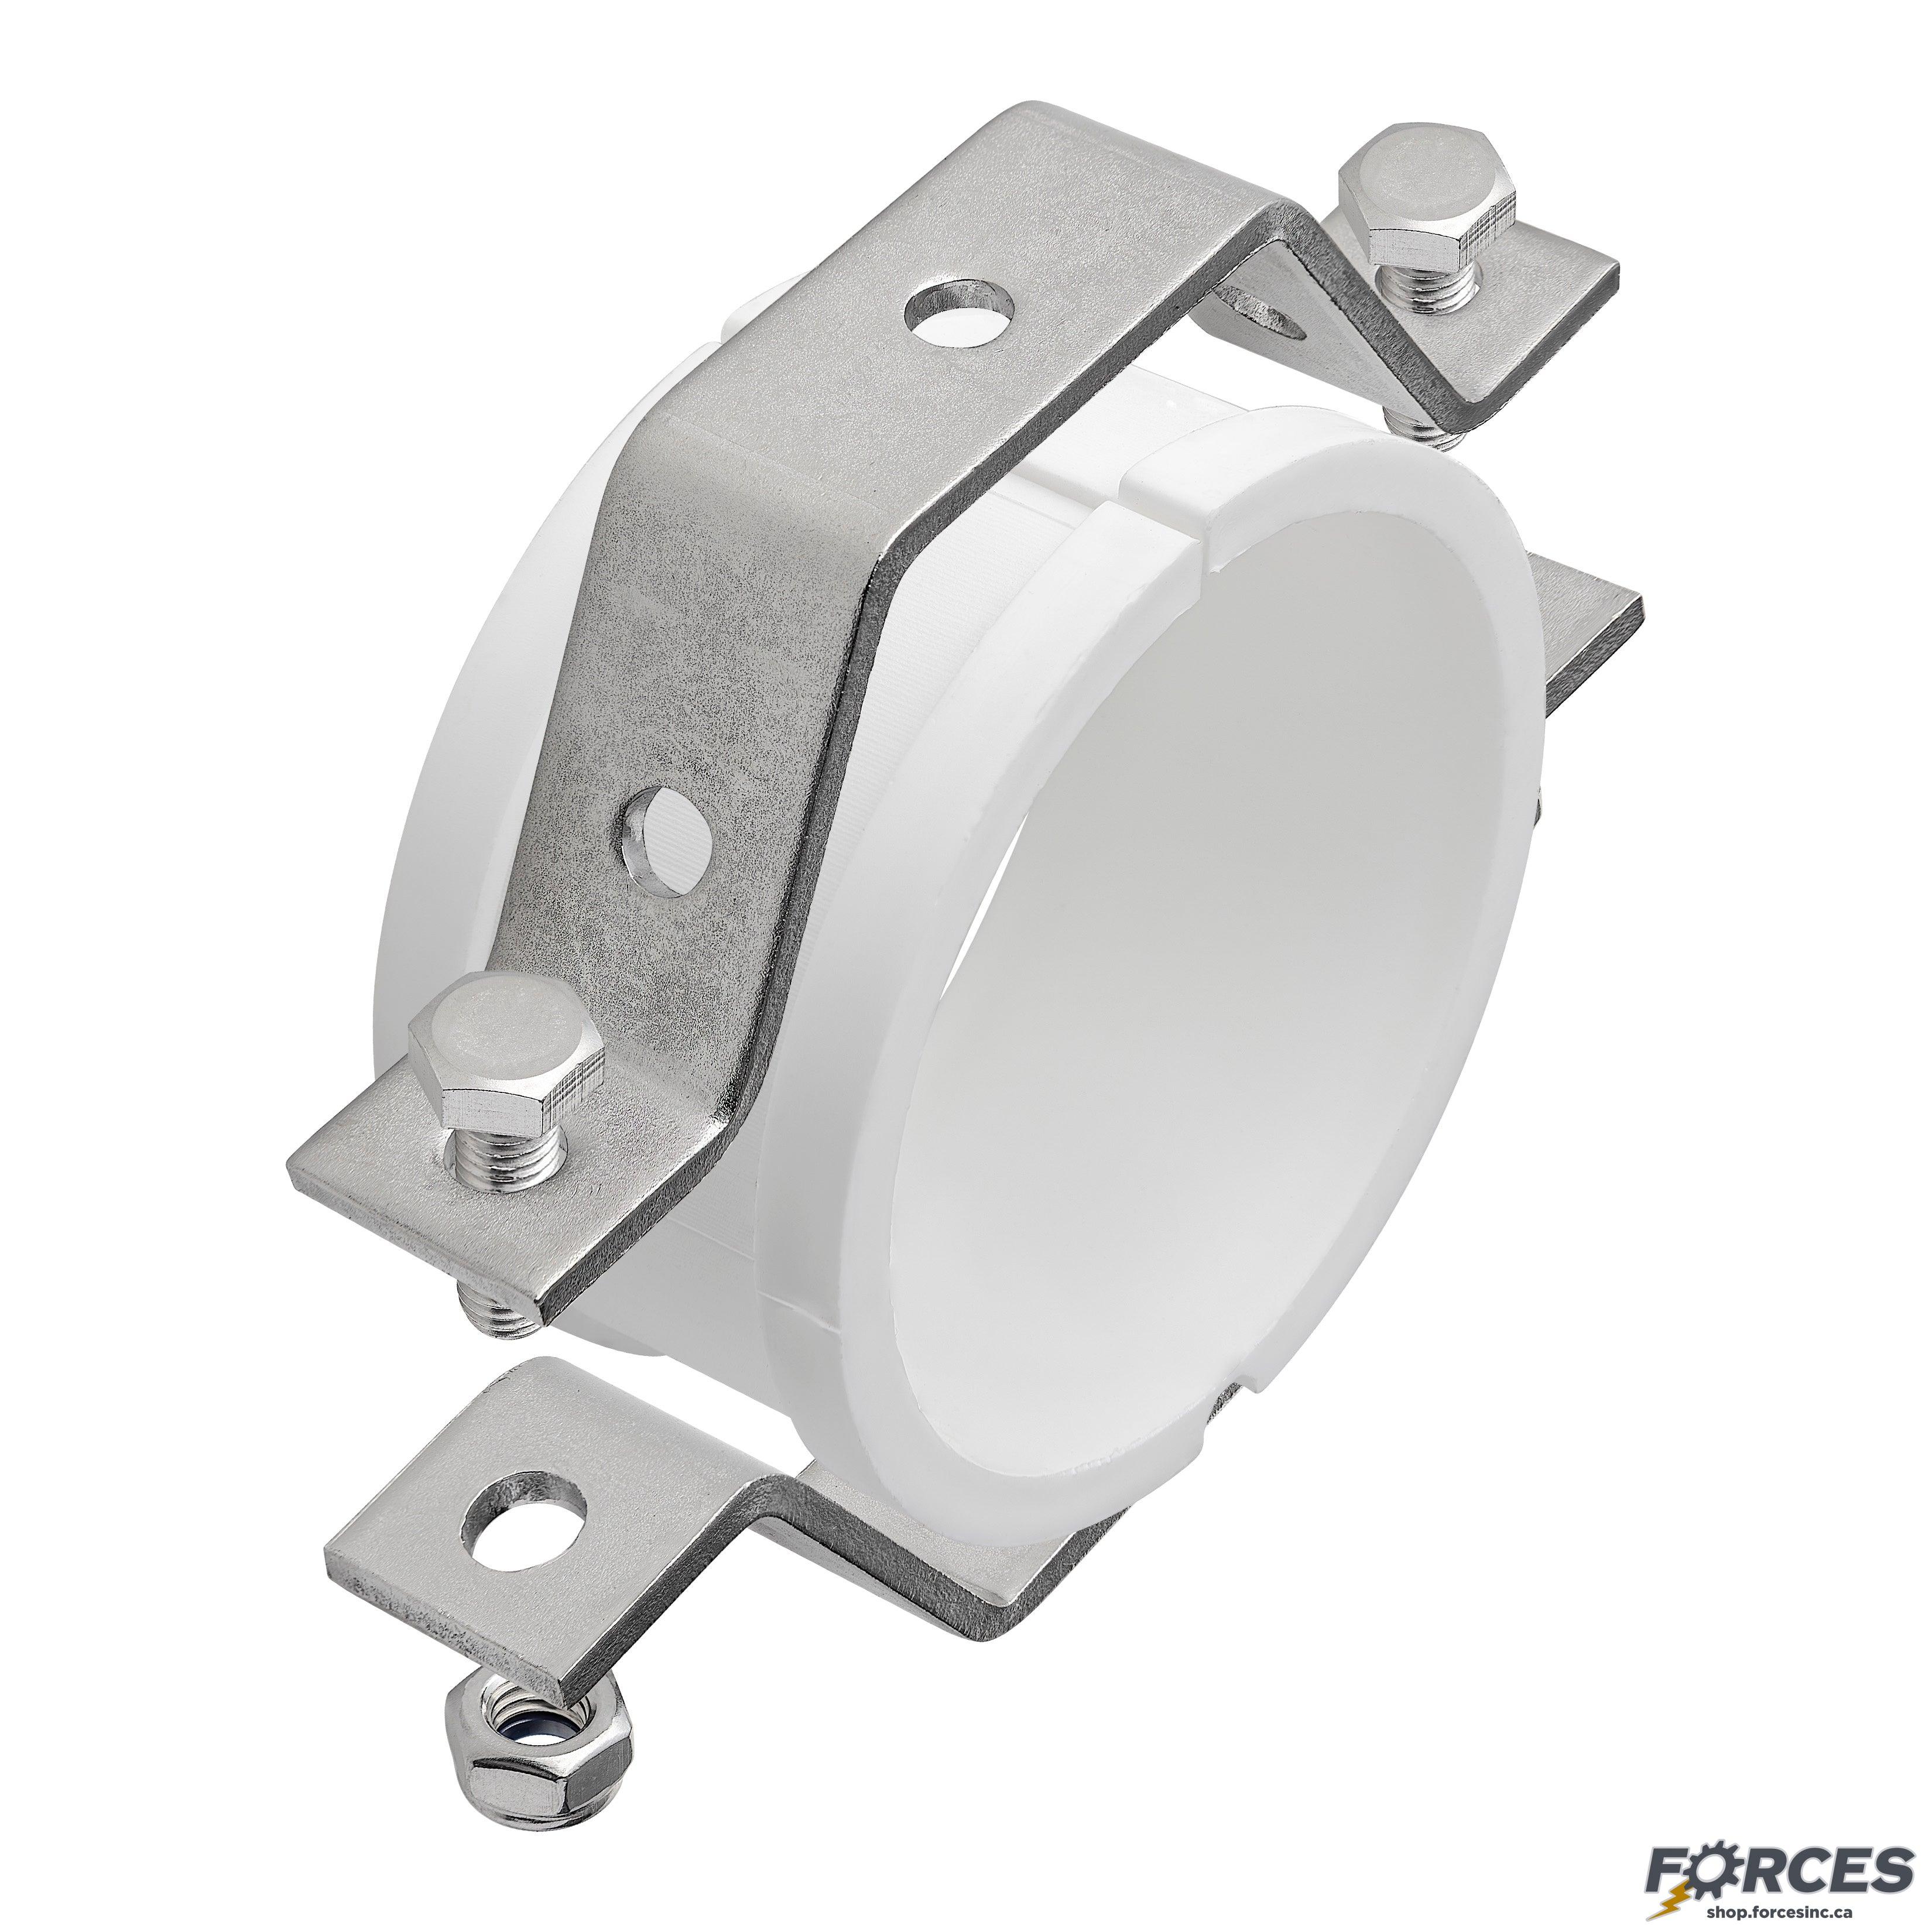 1/2" Hanger for Sanitary Tube With PVC Insert 304 Stainless Steel - Forces Inc